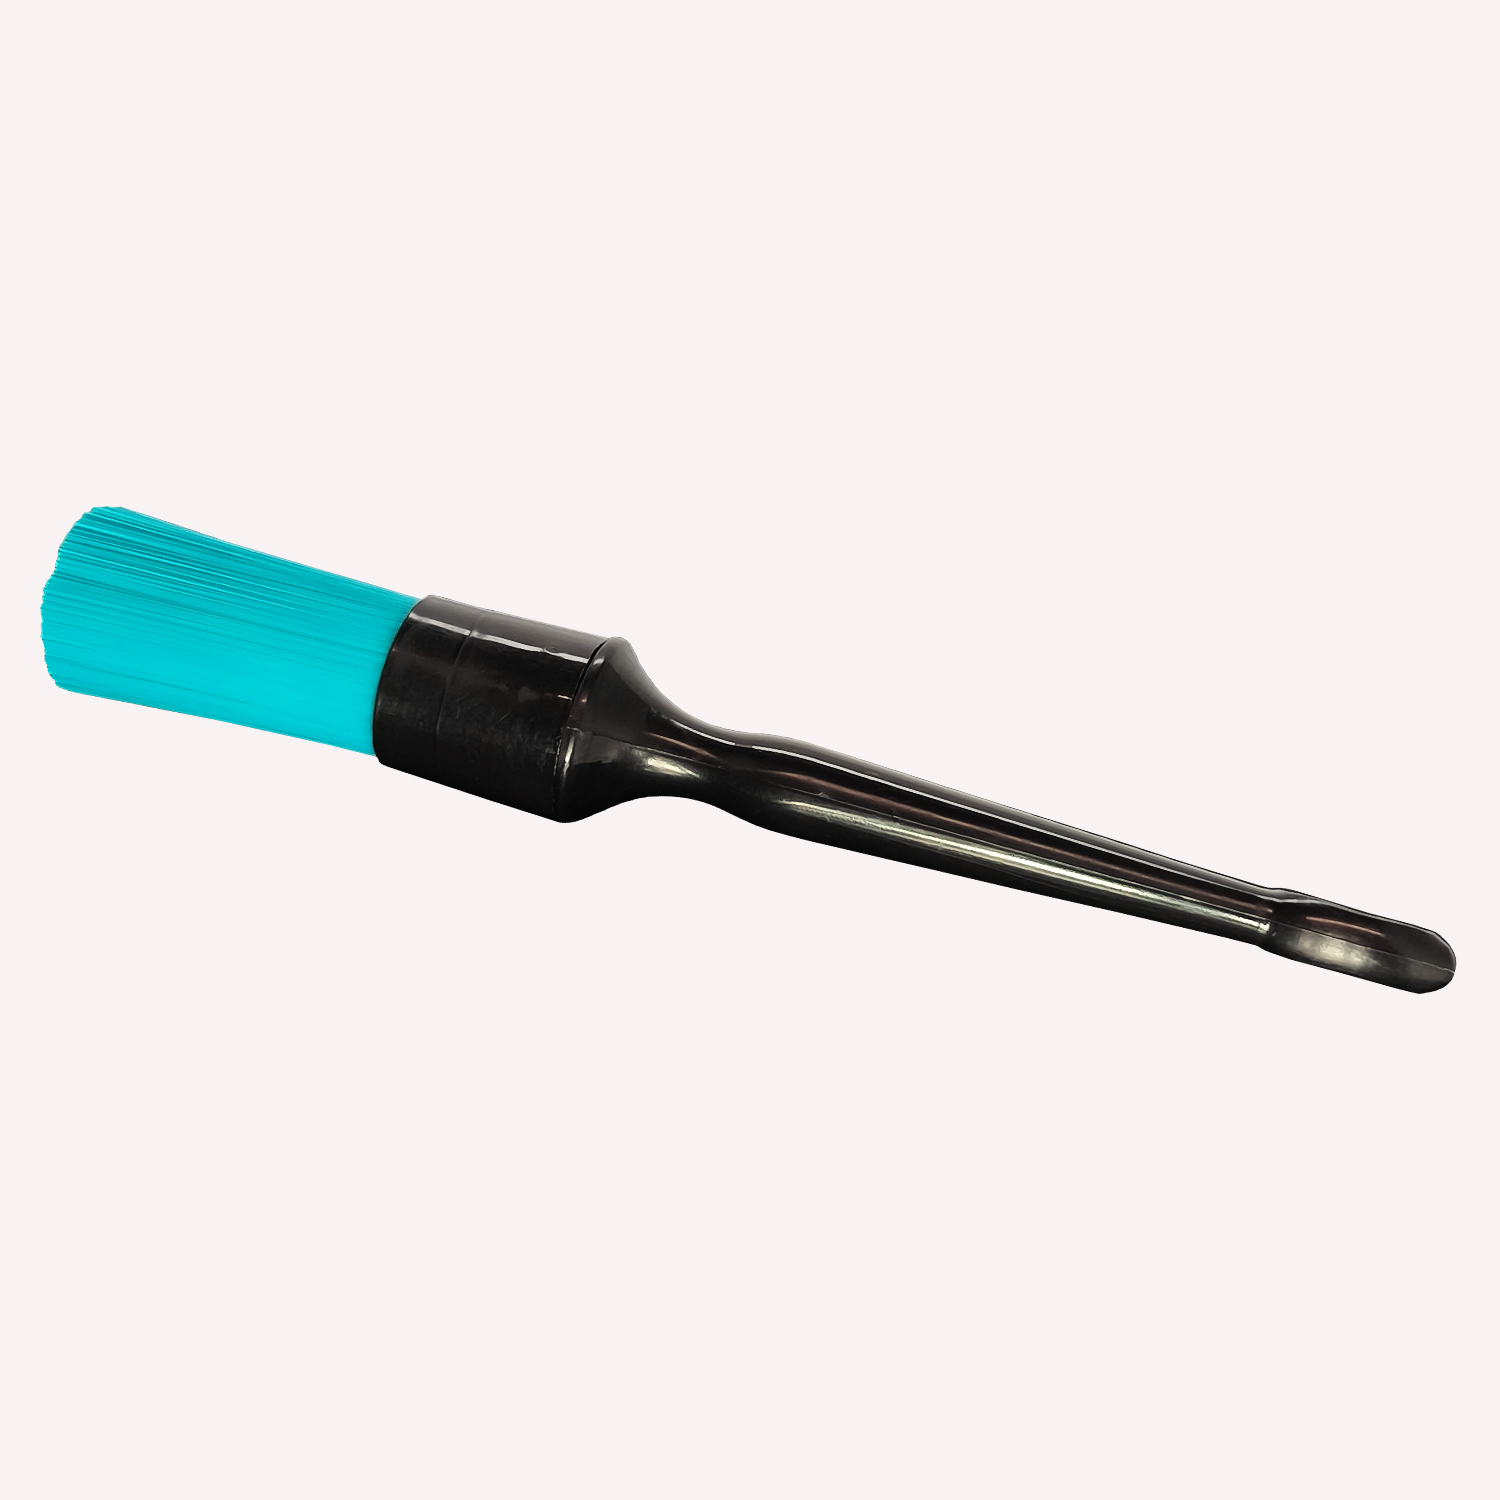 Heavy duty detailing brush with black plastic handle and bright blue bristles.